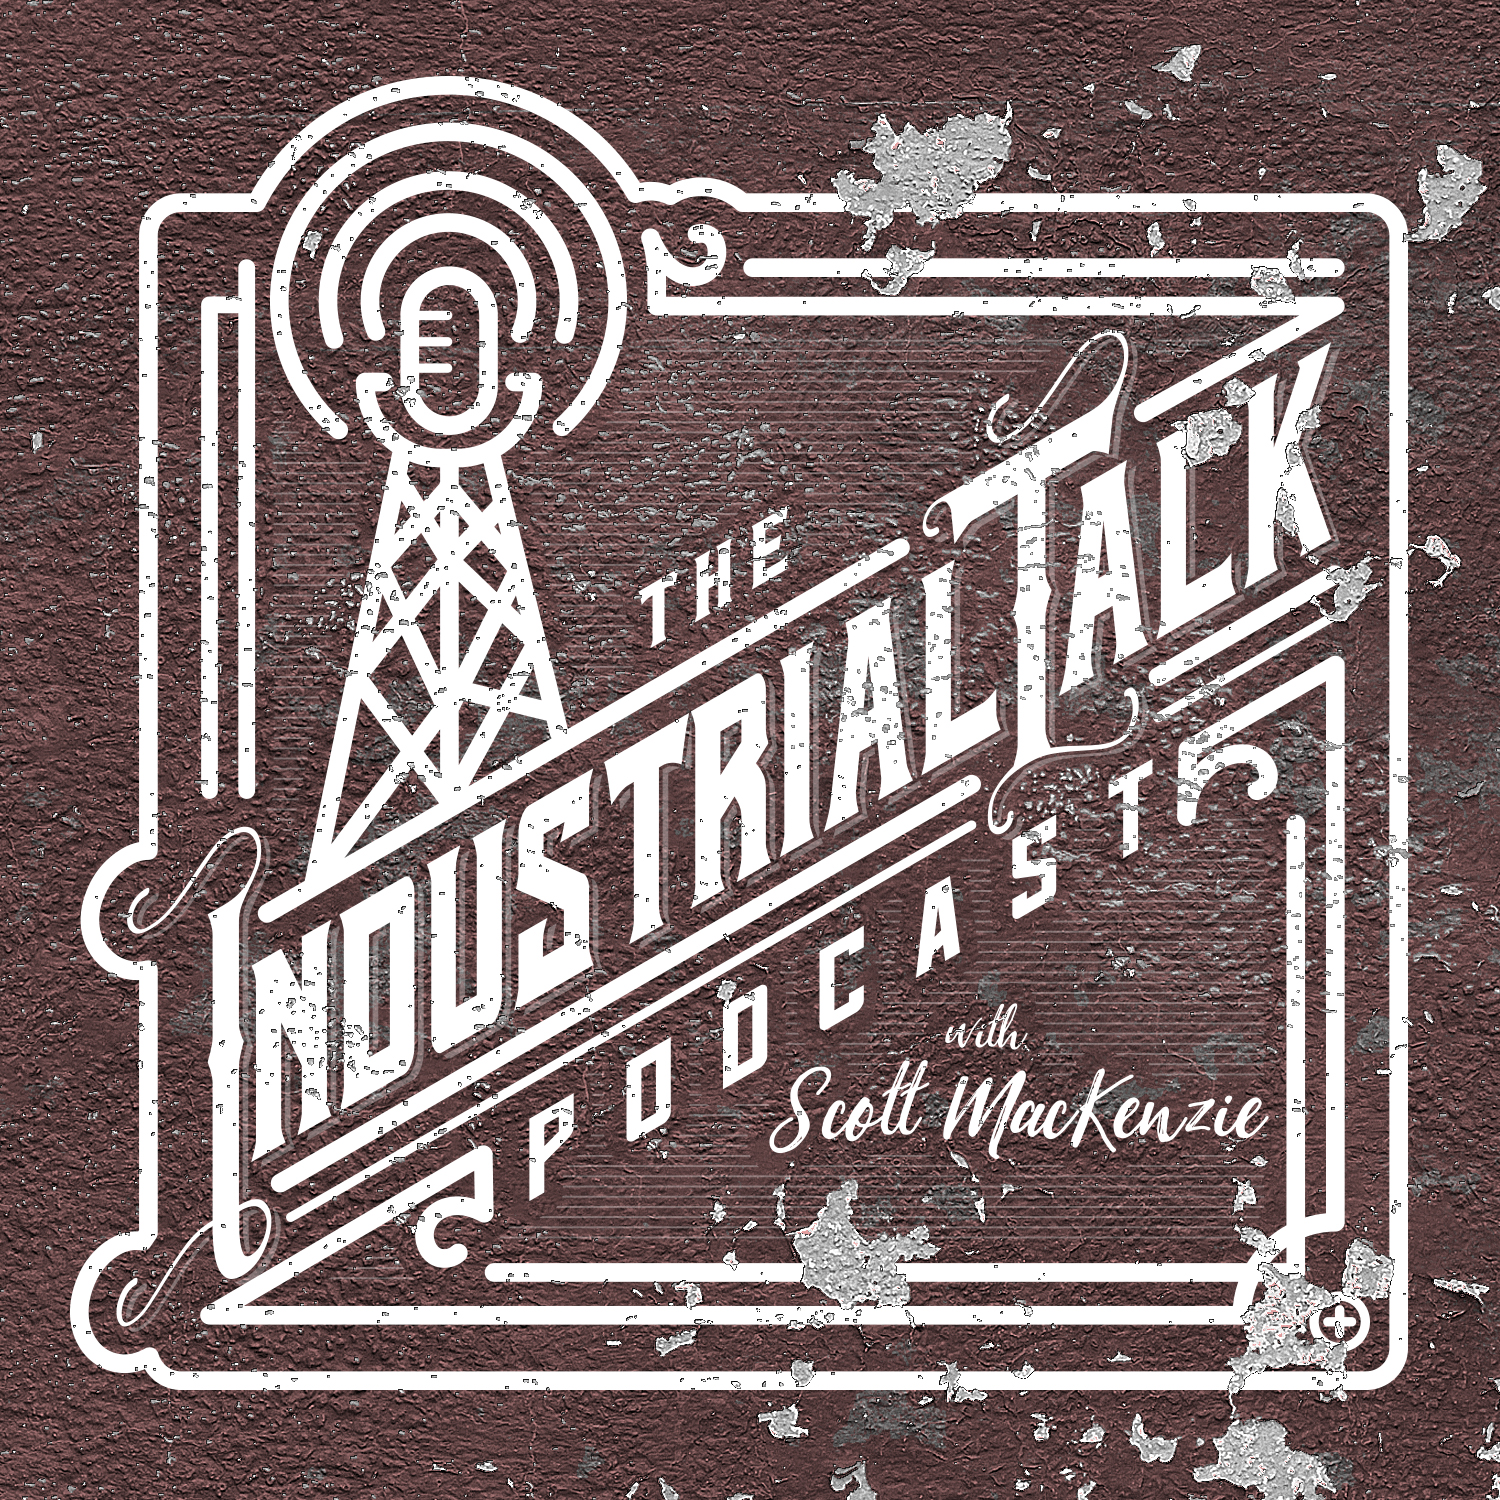 Artwork for podcast The Industrial Talk Podcast with Scott MacKenzie